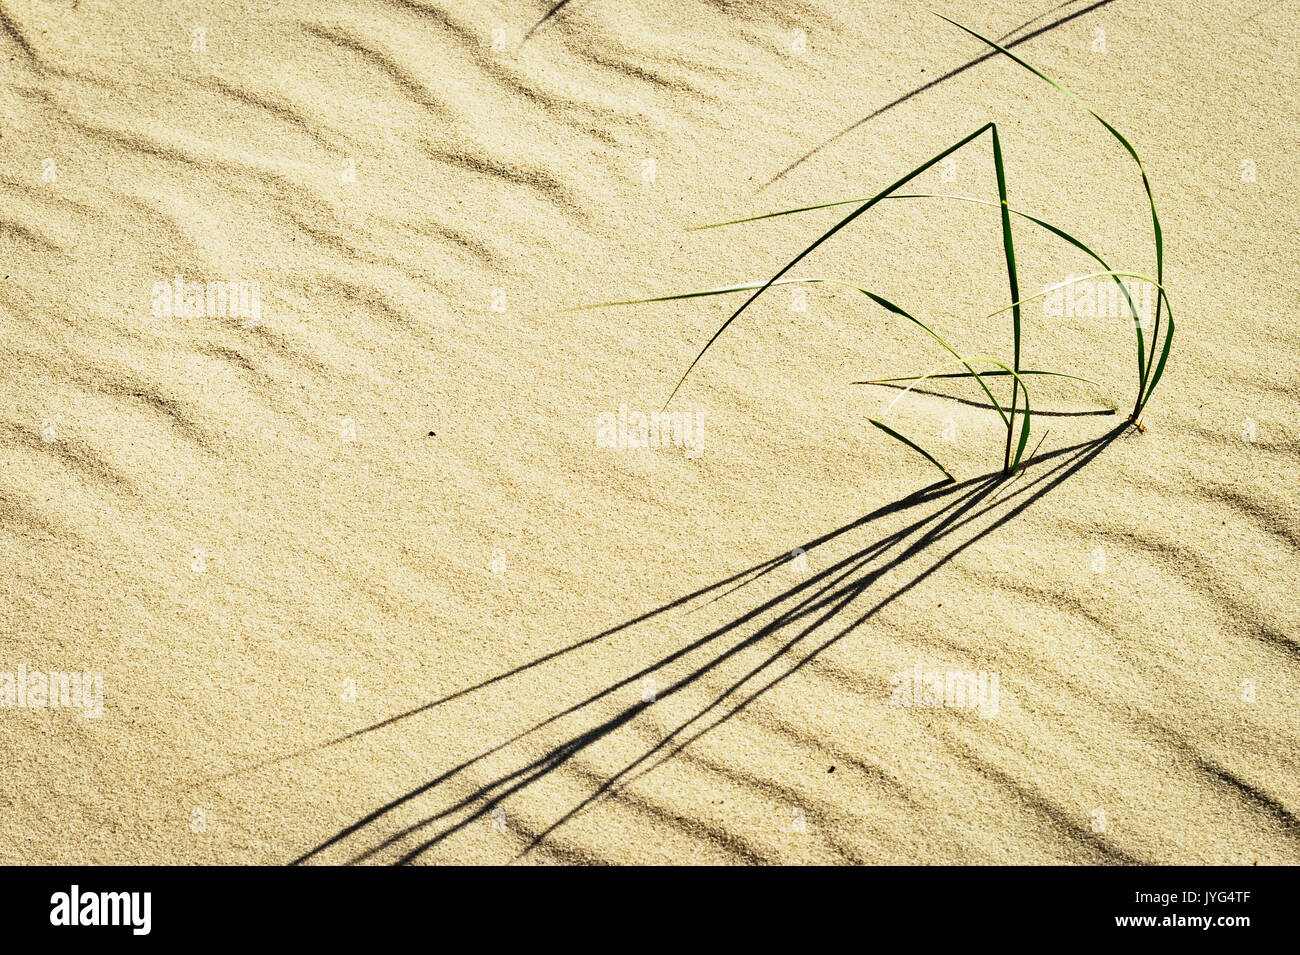 Clusters of beach grass or sand ryegrass Leymus arenarius growing on dune at Baltic coast. Pomerania, northern Poland. Stock Photo